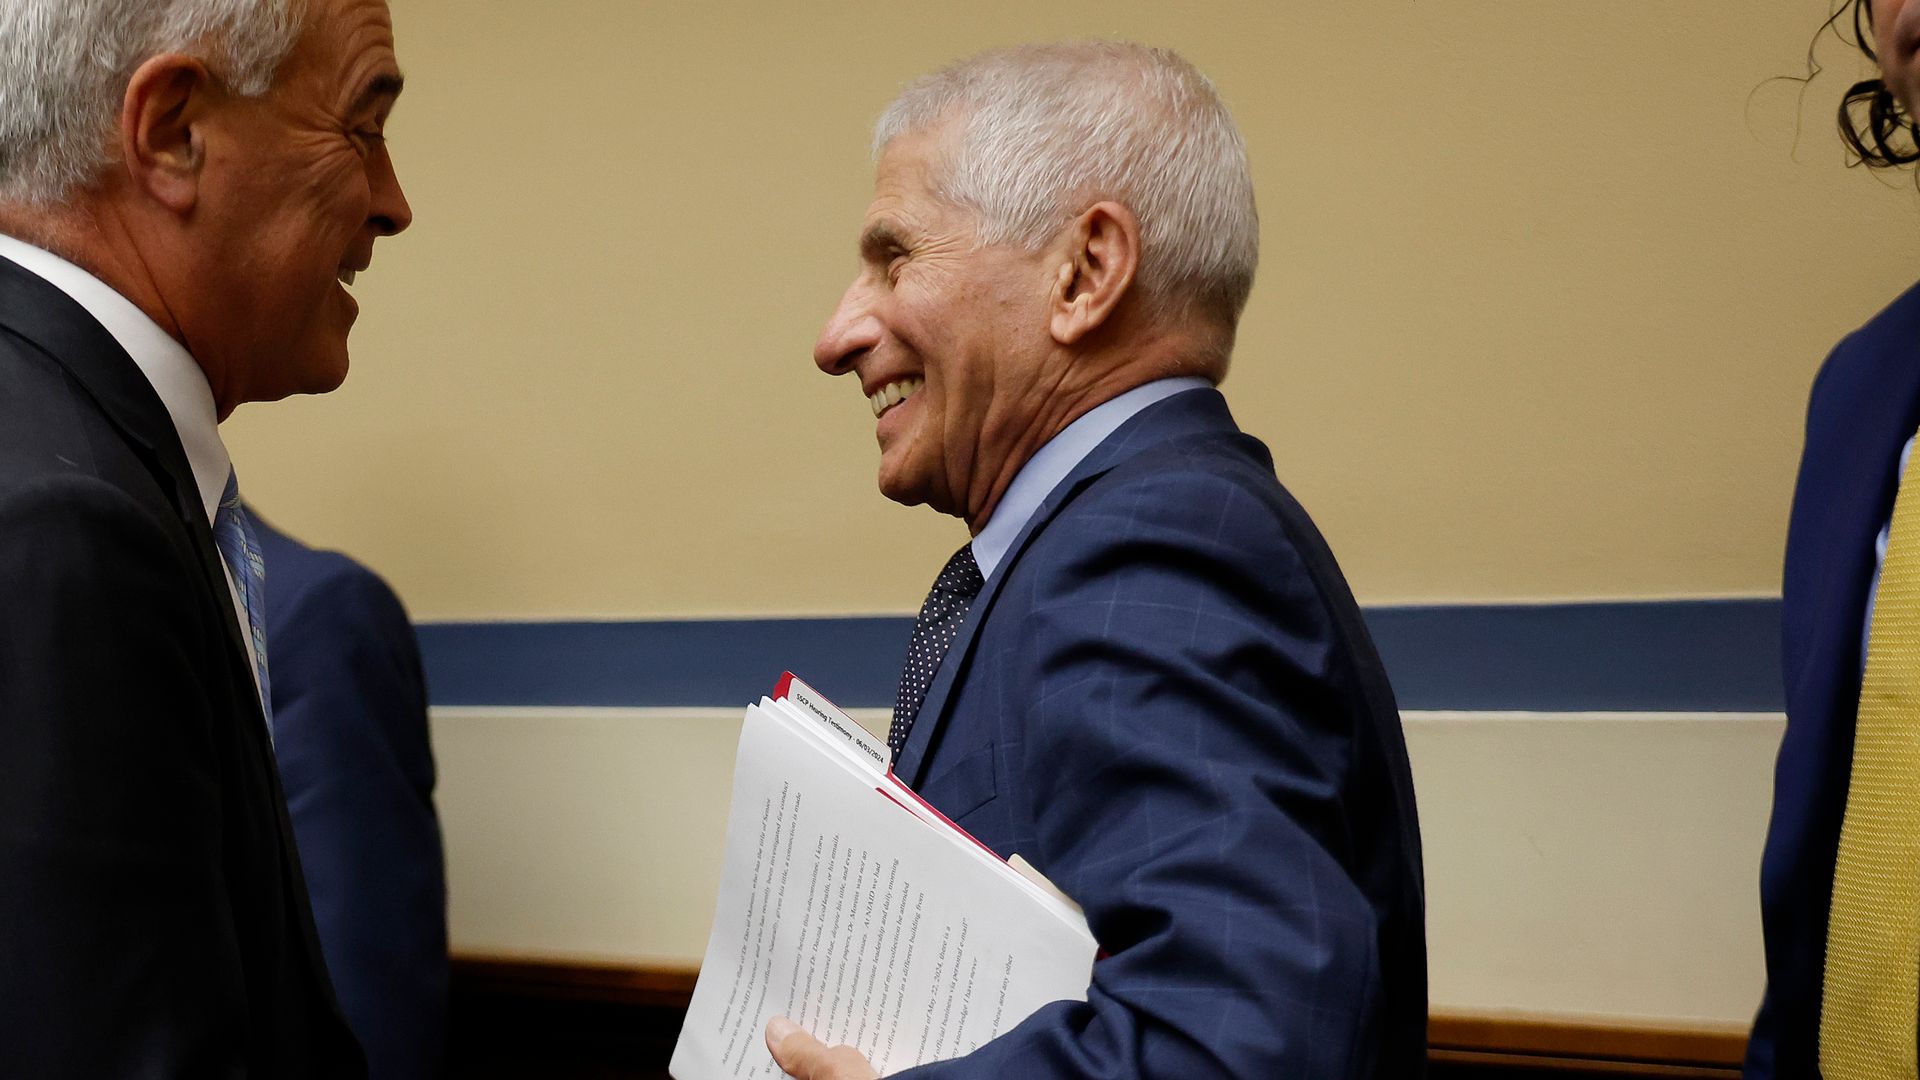 Dr. Anthony Fauci testified on Capitol Hill and denied using a Gmail account for official business after revelations that his adviser did.